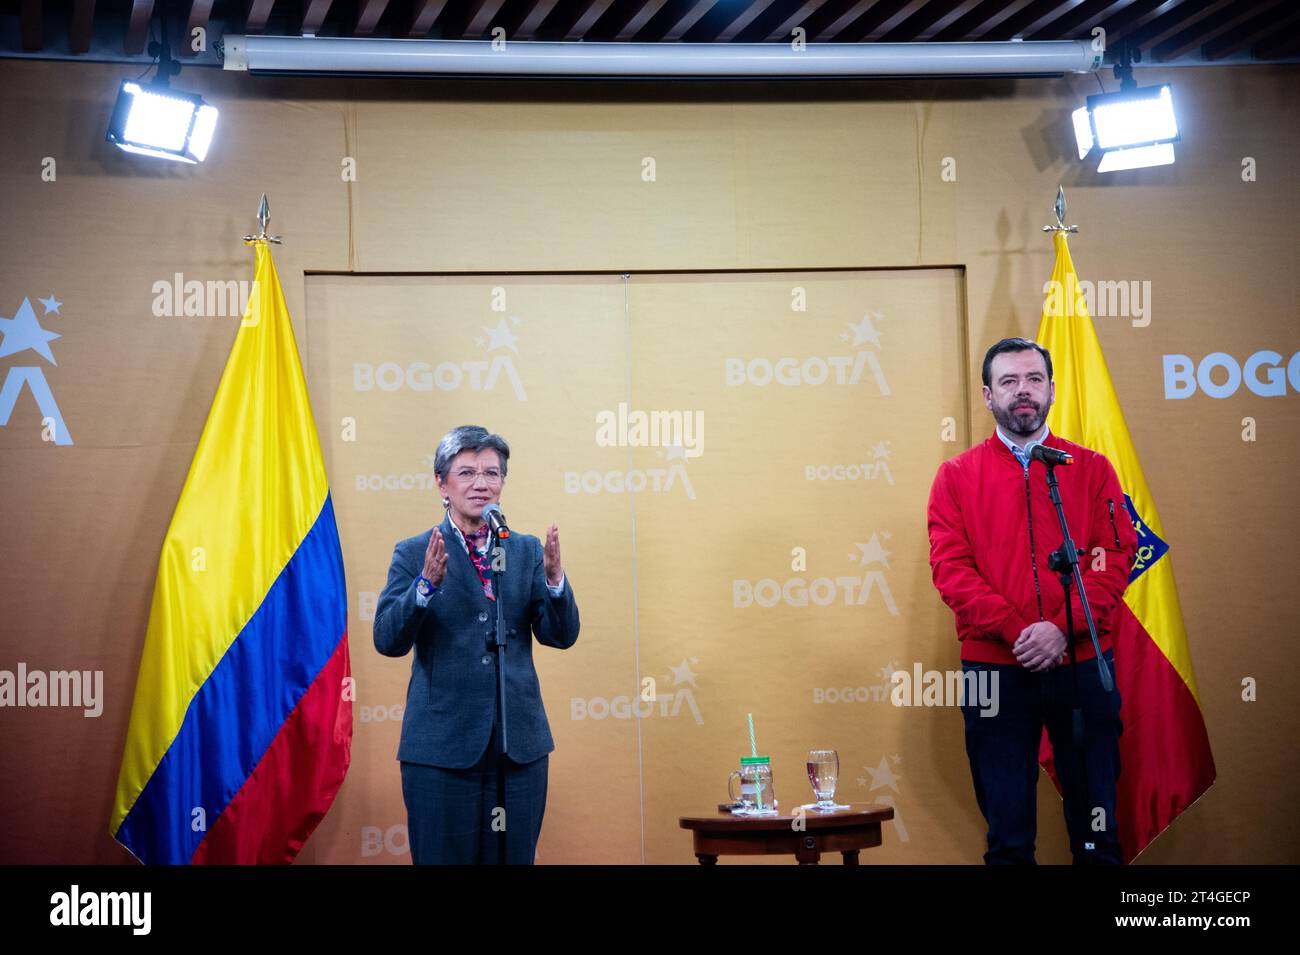 Bogota, Colombia. 30th Oct, 2023. Bogota's mayor Claudia Lopez (L) and mayor-elect Carlos Fernando Galan (R) during a press conference after a meeting between the Bogota's mayor Claudia Lopez and mayor-elect Carlos Fernando Galan, in Bogota, Colombia, october 30, 2023. Photo by: Chepa Beltran/Long Visual Press Credit: Long Visual Press/Alamy Live News Stock Photo